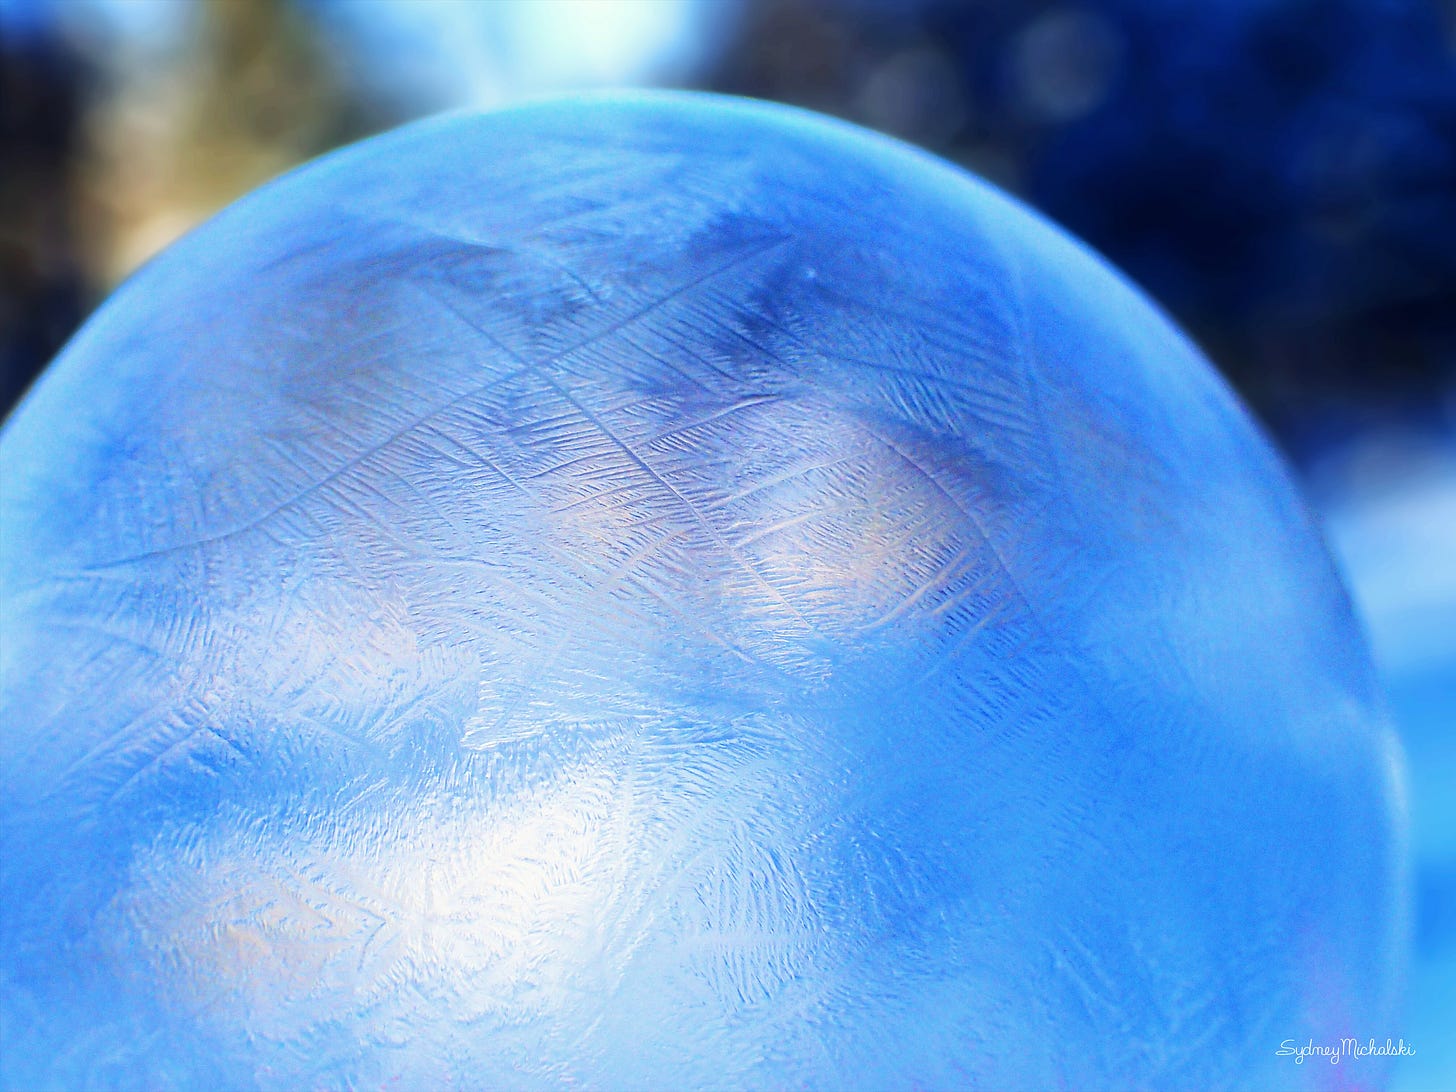 A close-up of the feathery crystal patterns in a frozen bubble.